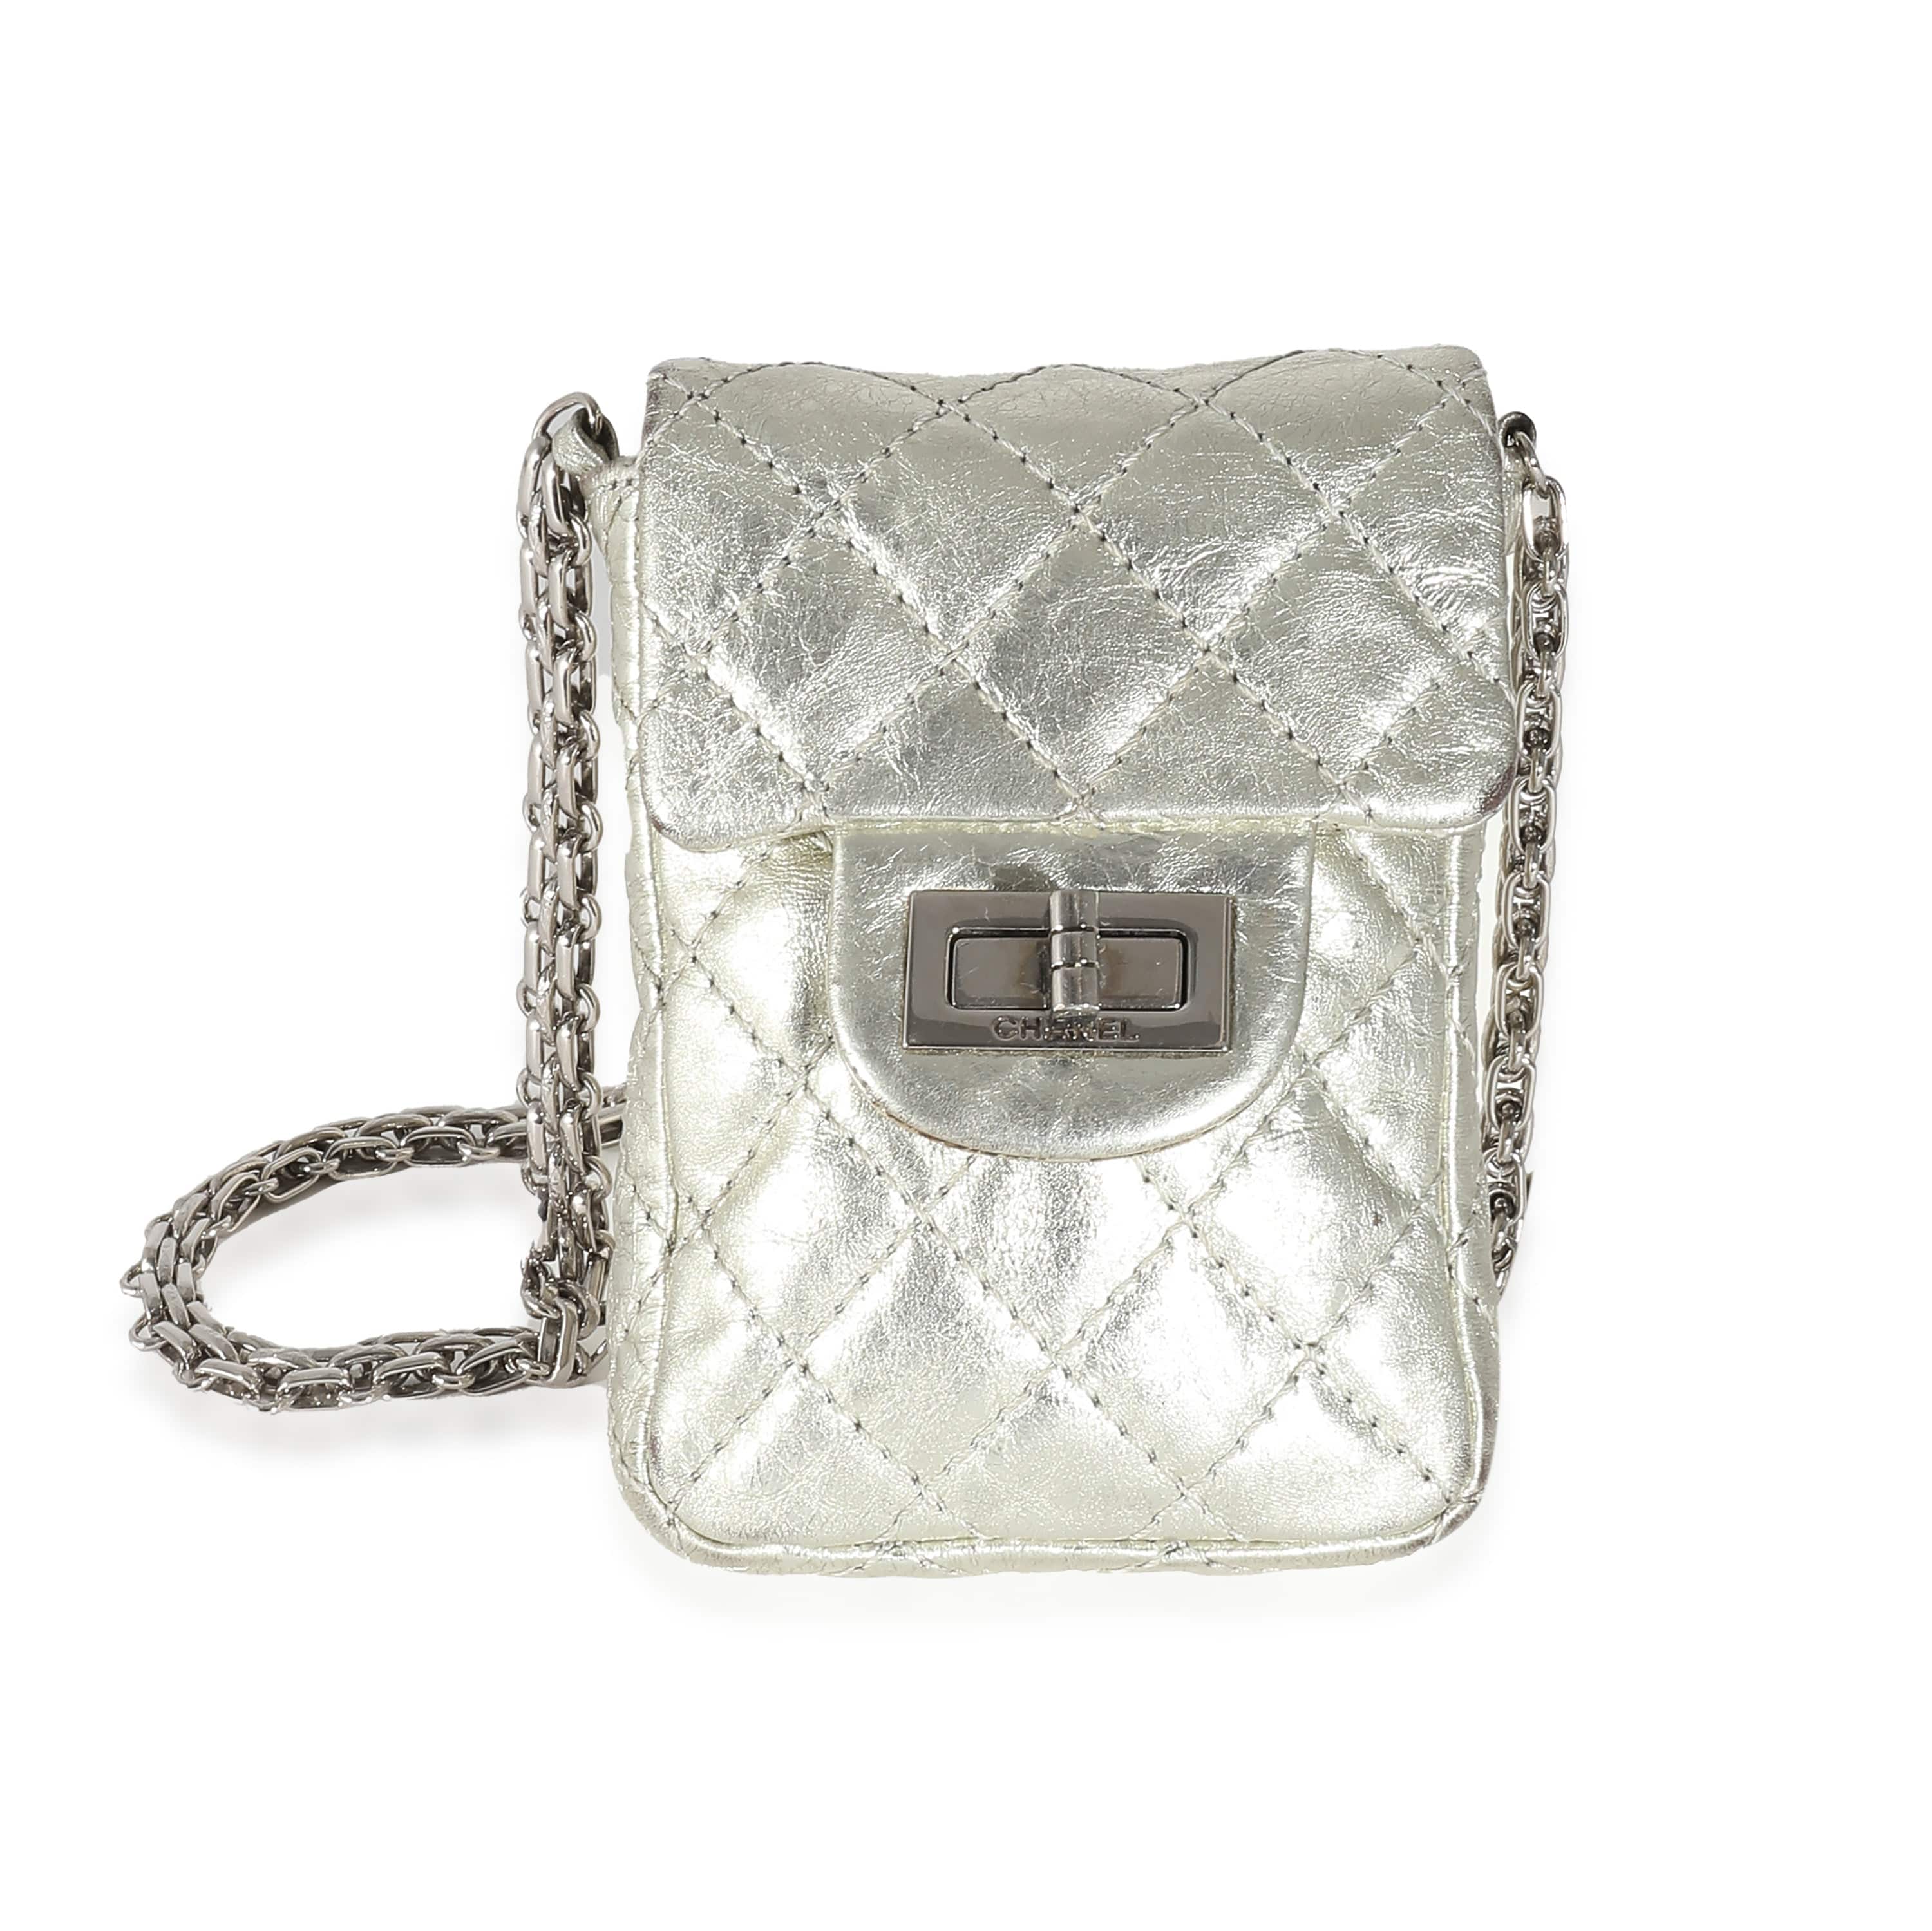 Chanel Chanel Silver Metallic Aged Calfskin Quilted 2.55 Reissue Phone Case